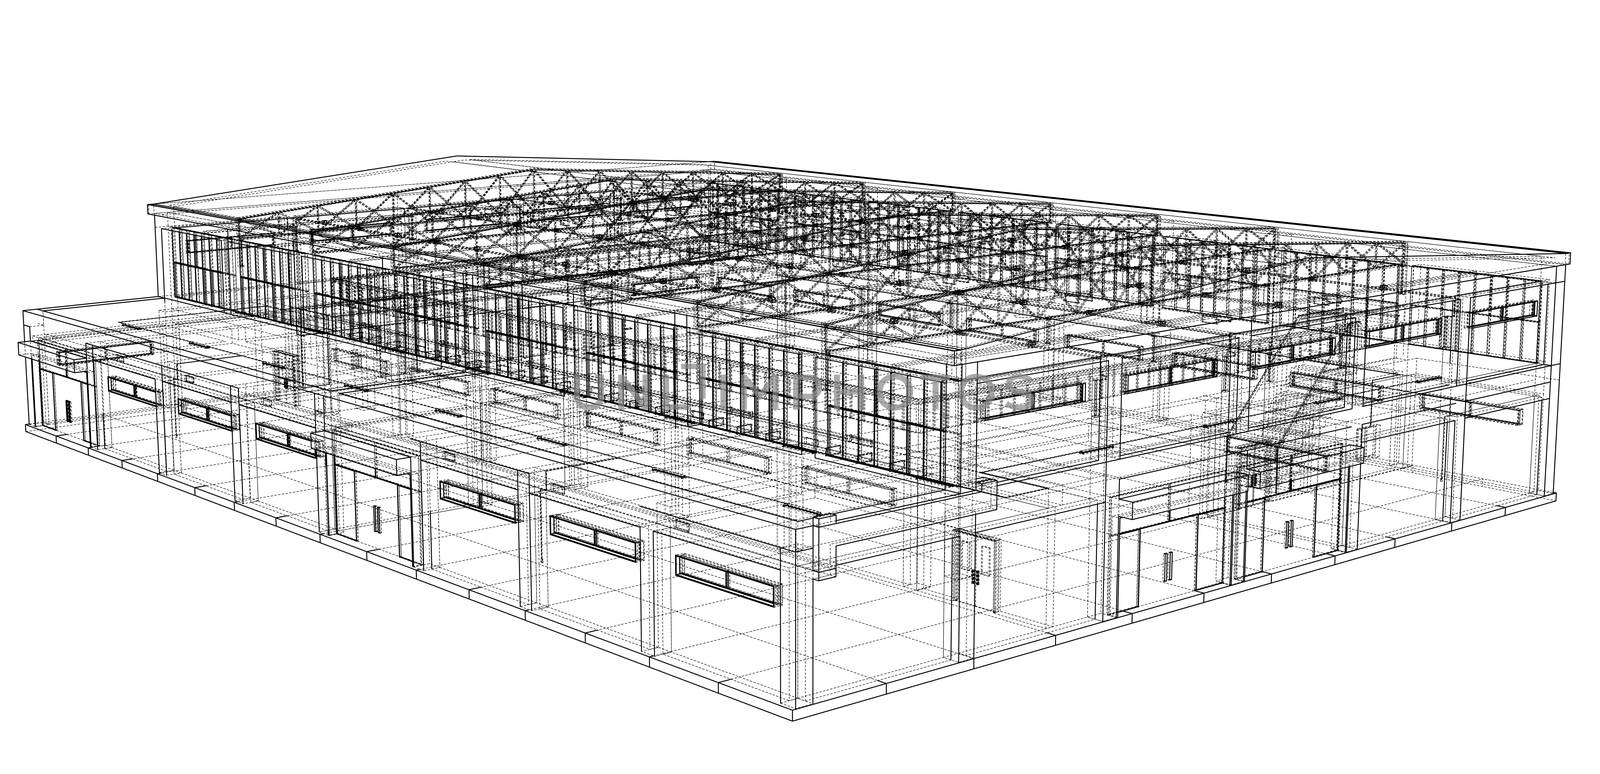 Warehouse sketch. Blueprint or Wire-frame style. 3d illustration